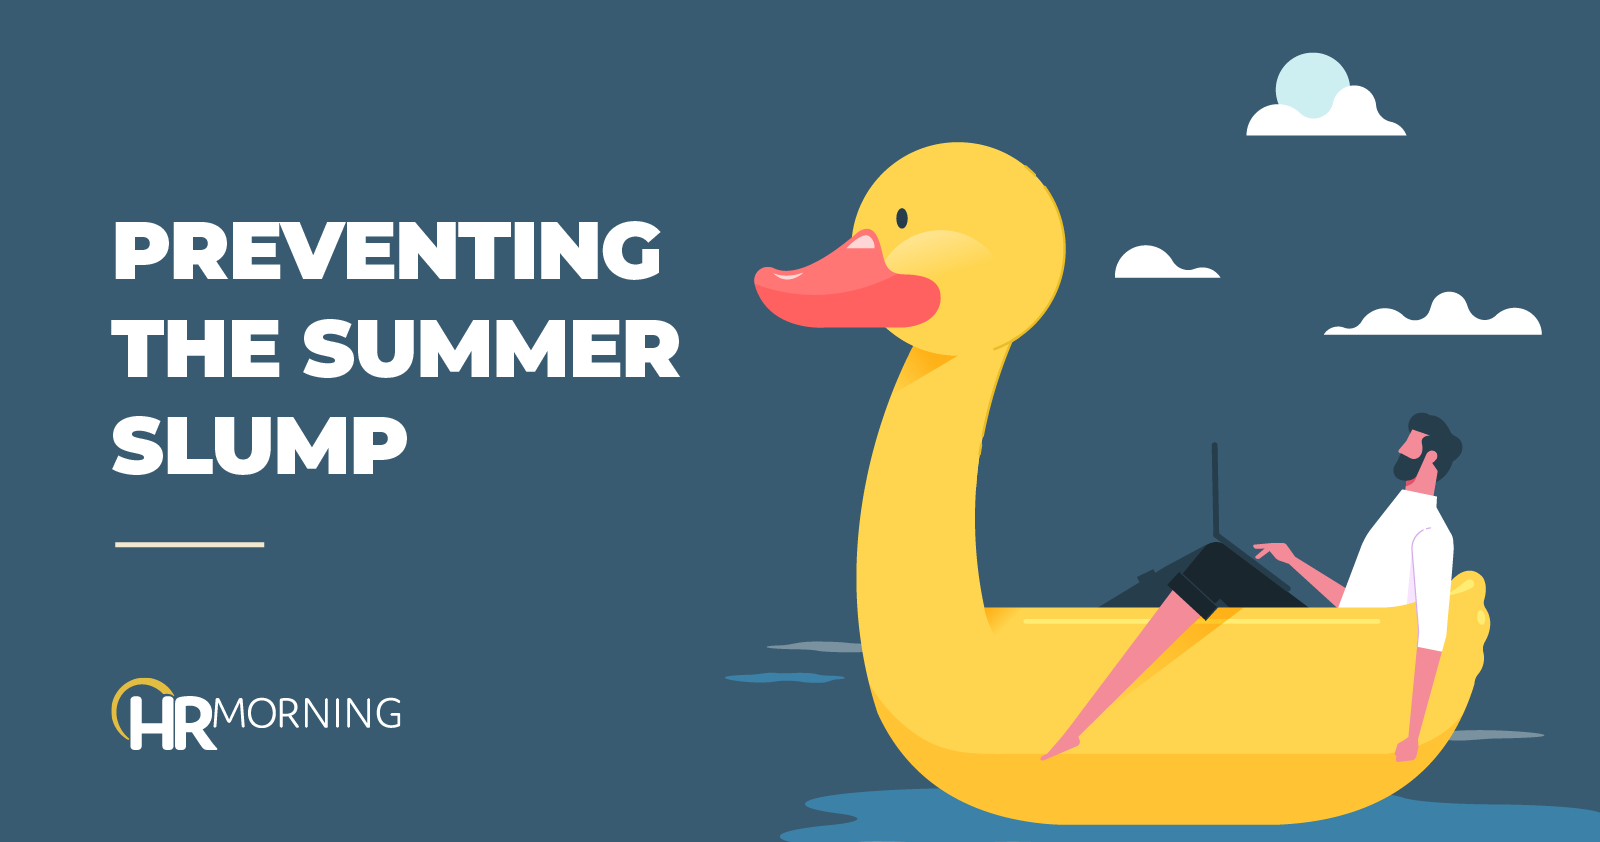 Keep the ‘summer slump’ at bay with 5 ways to heat up communication